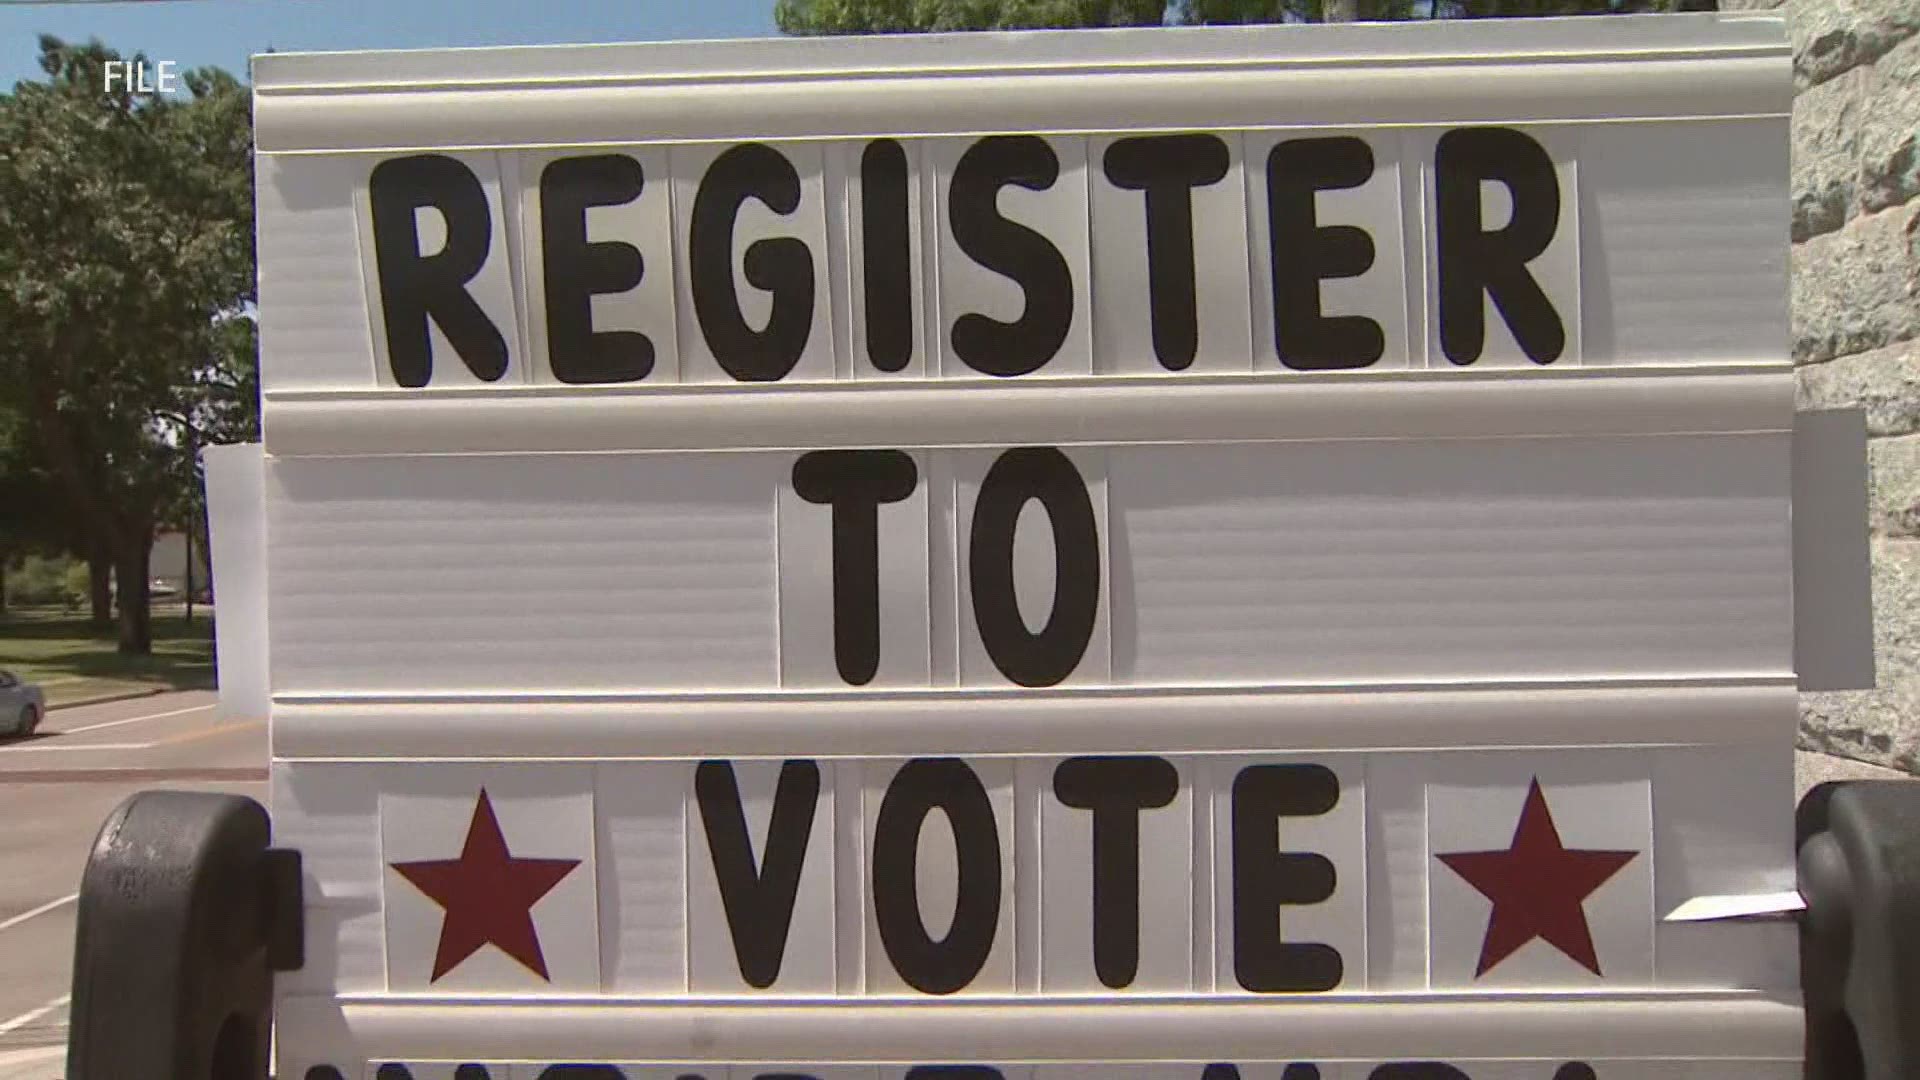 Many of have already voted and some plan to go to the polls to vote tomorrow. But are you registered to vote?